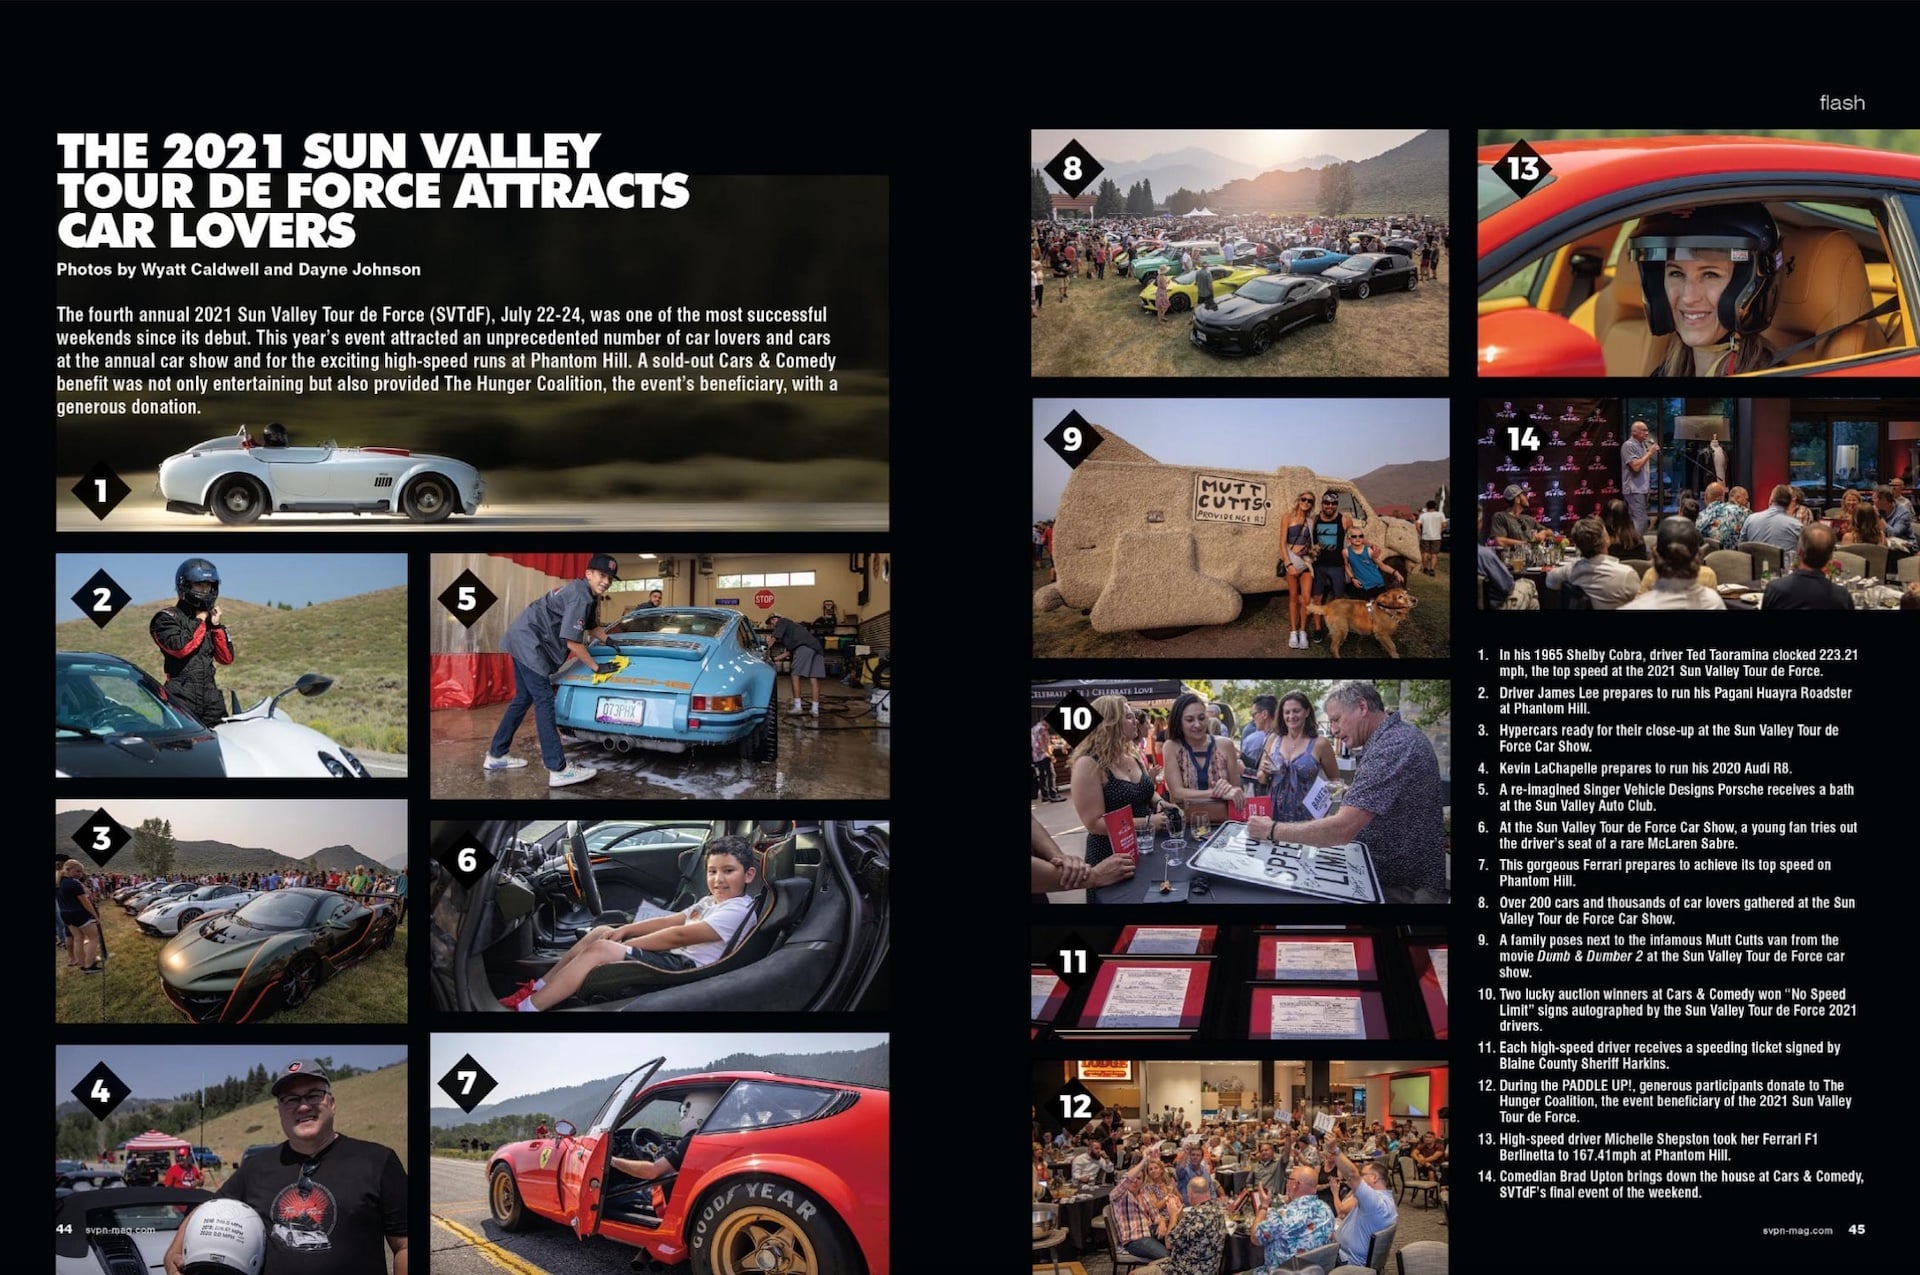 The 2021 Sun Valley Tour de Force Attracts Car Lovers